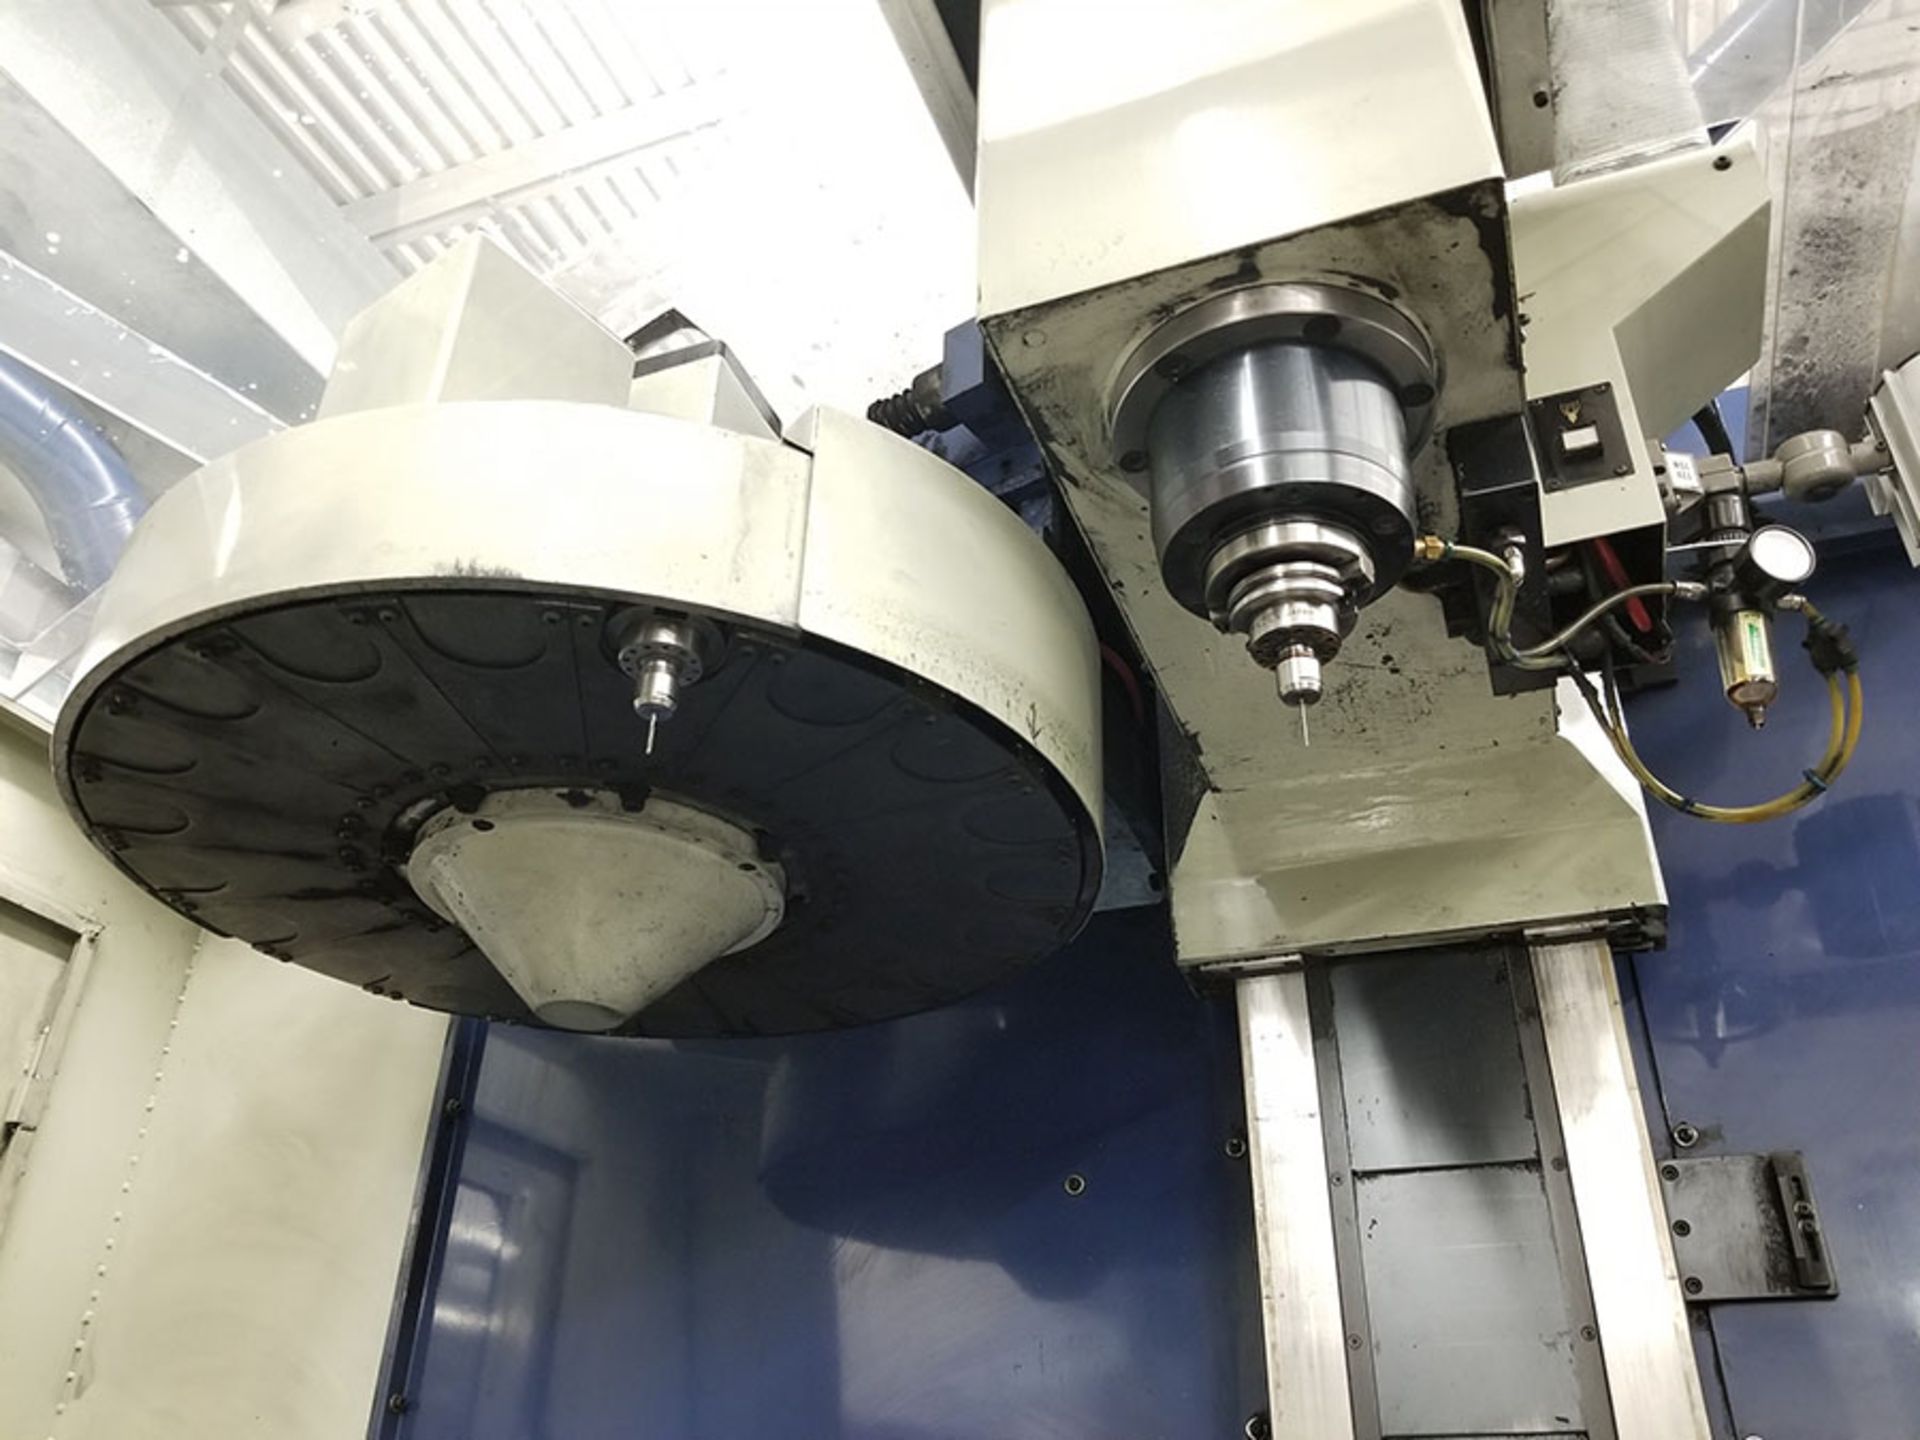 2000 VIPER CNC VERTICAL MACHINING CENTER, MODEL V950, MITSUBISHI KWS-980A DRO CONTROL WITH HS BUFFER - Image 14 of 19